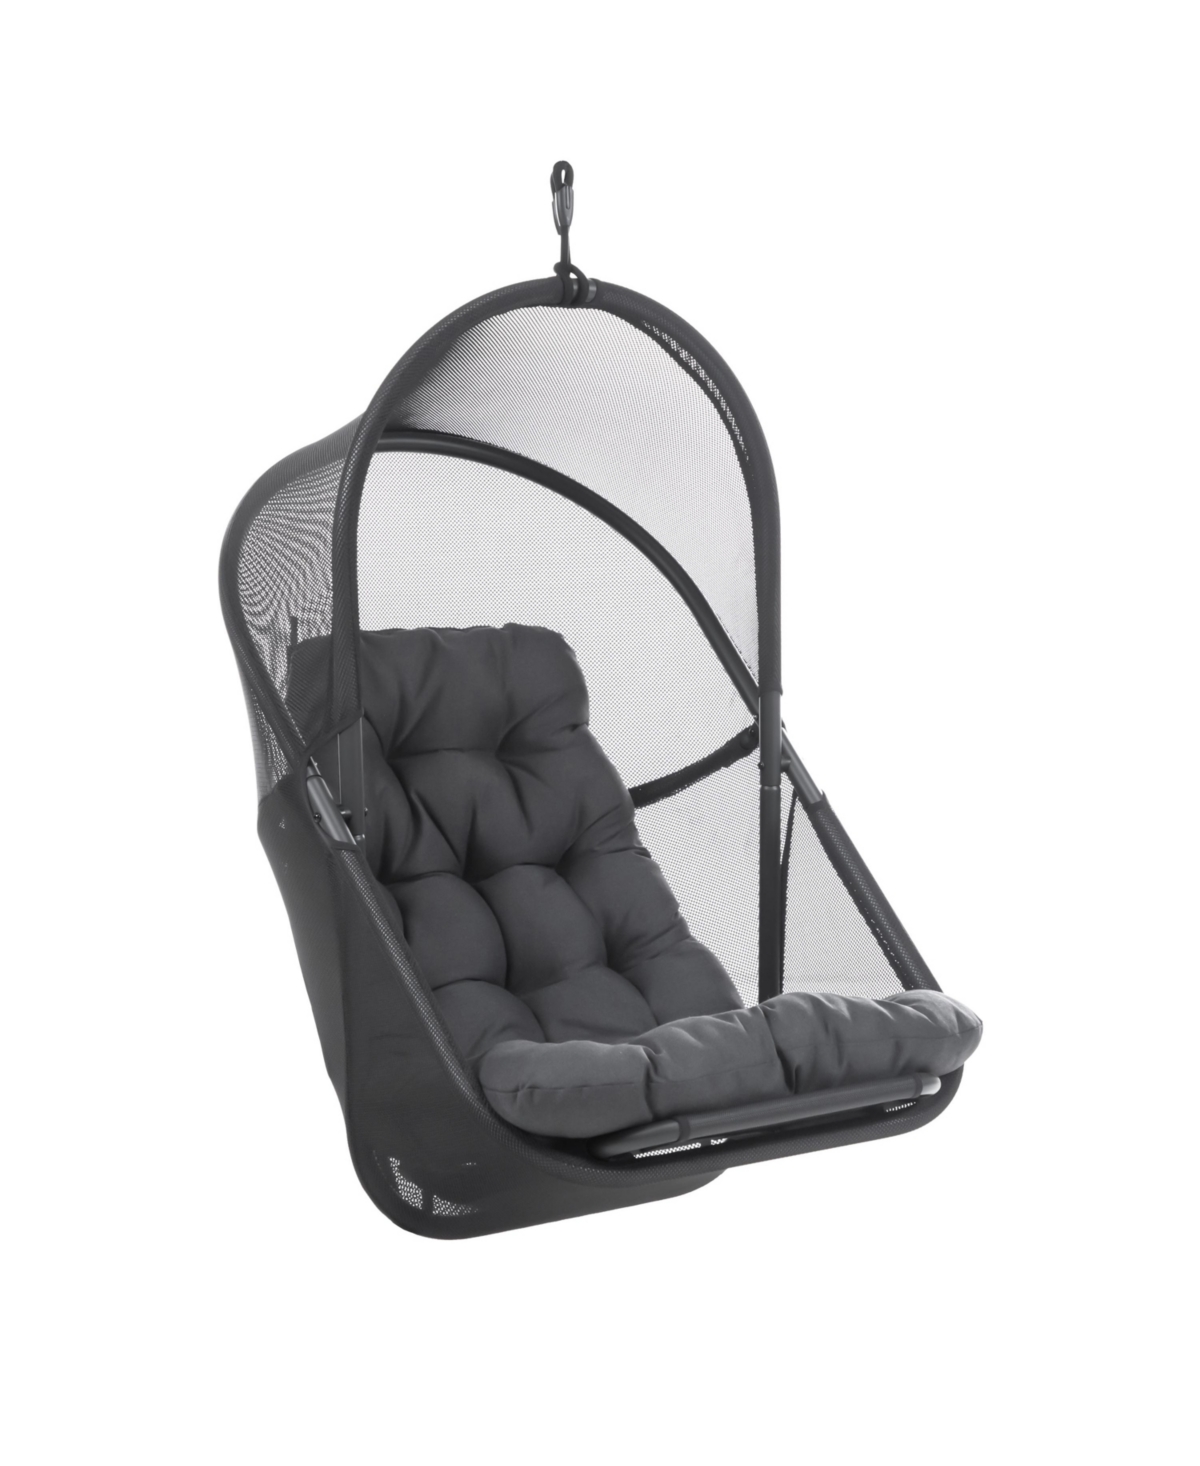 Furniture Of America 46" Mesh Foldable Swing Chair With Canopy High Back Cushion No Stand In Dark Gray